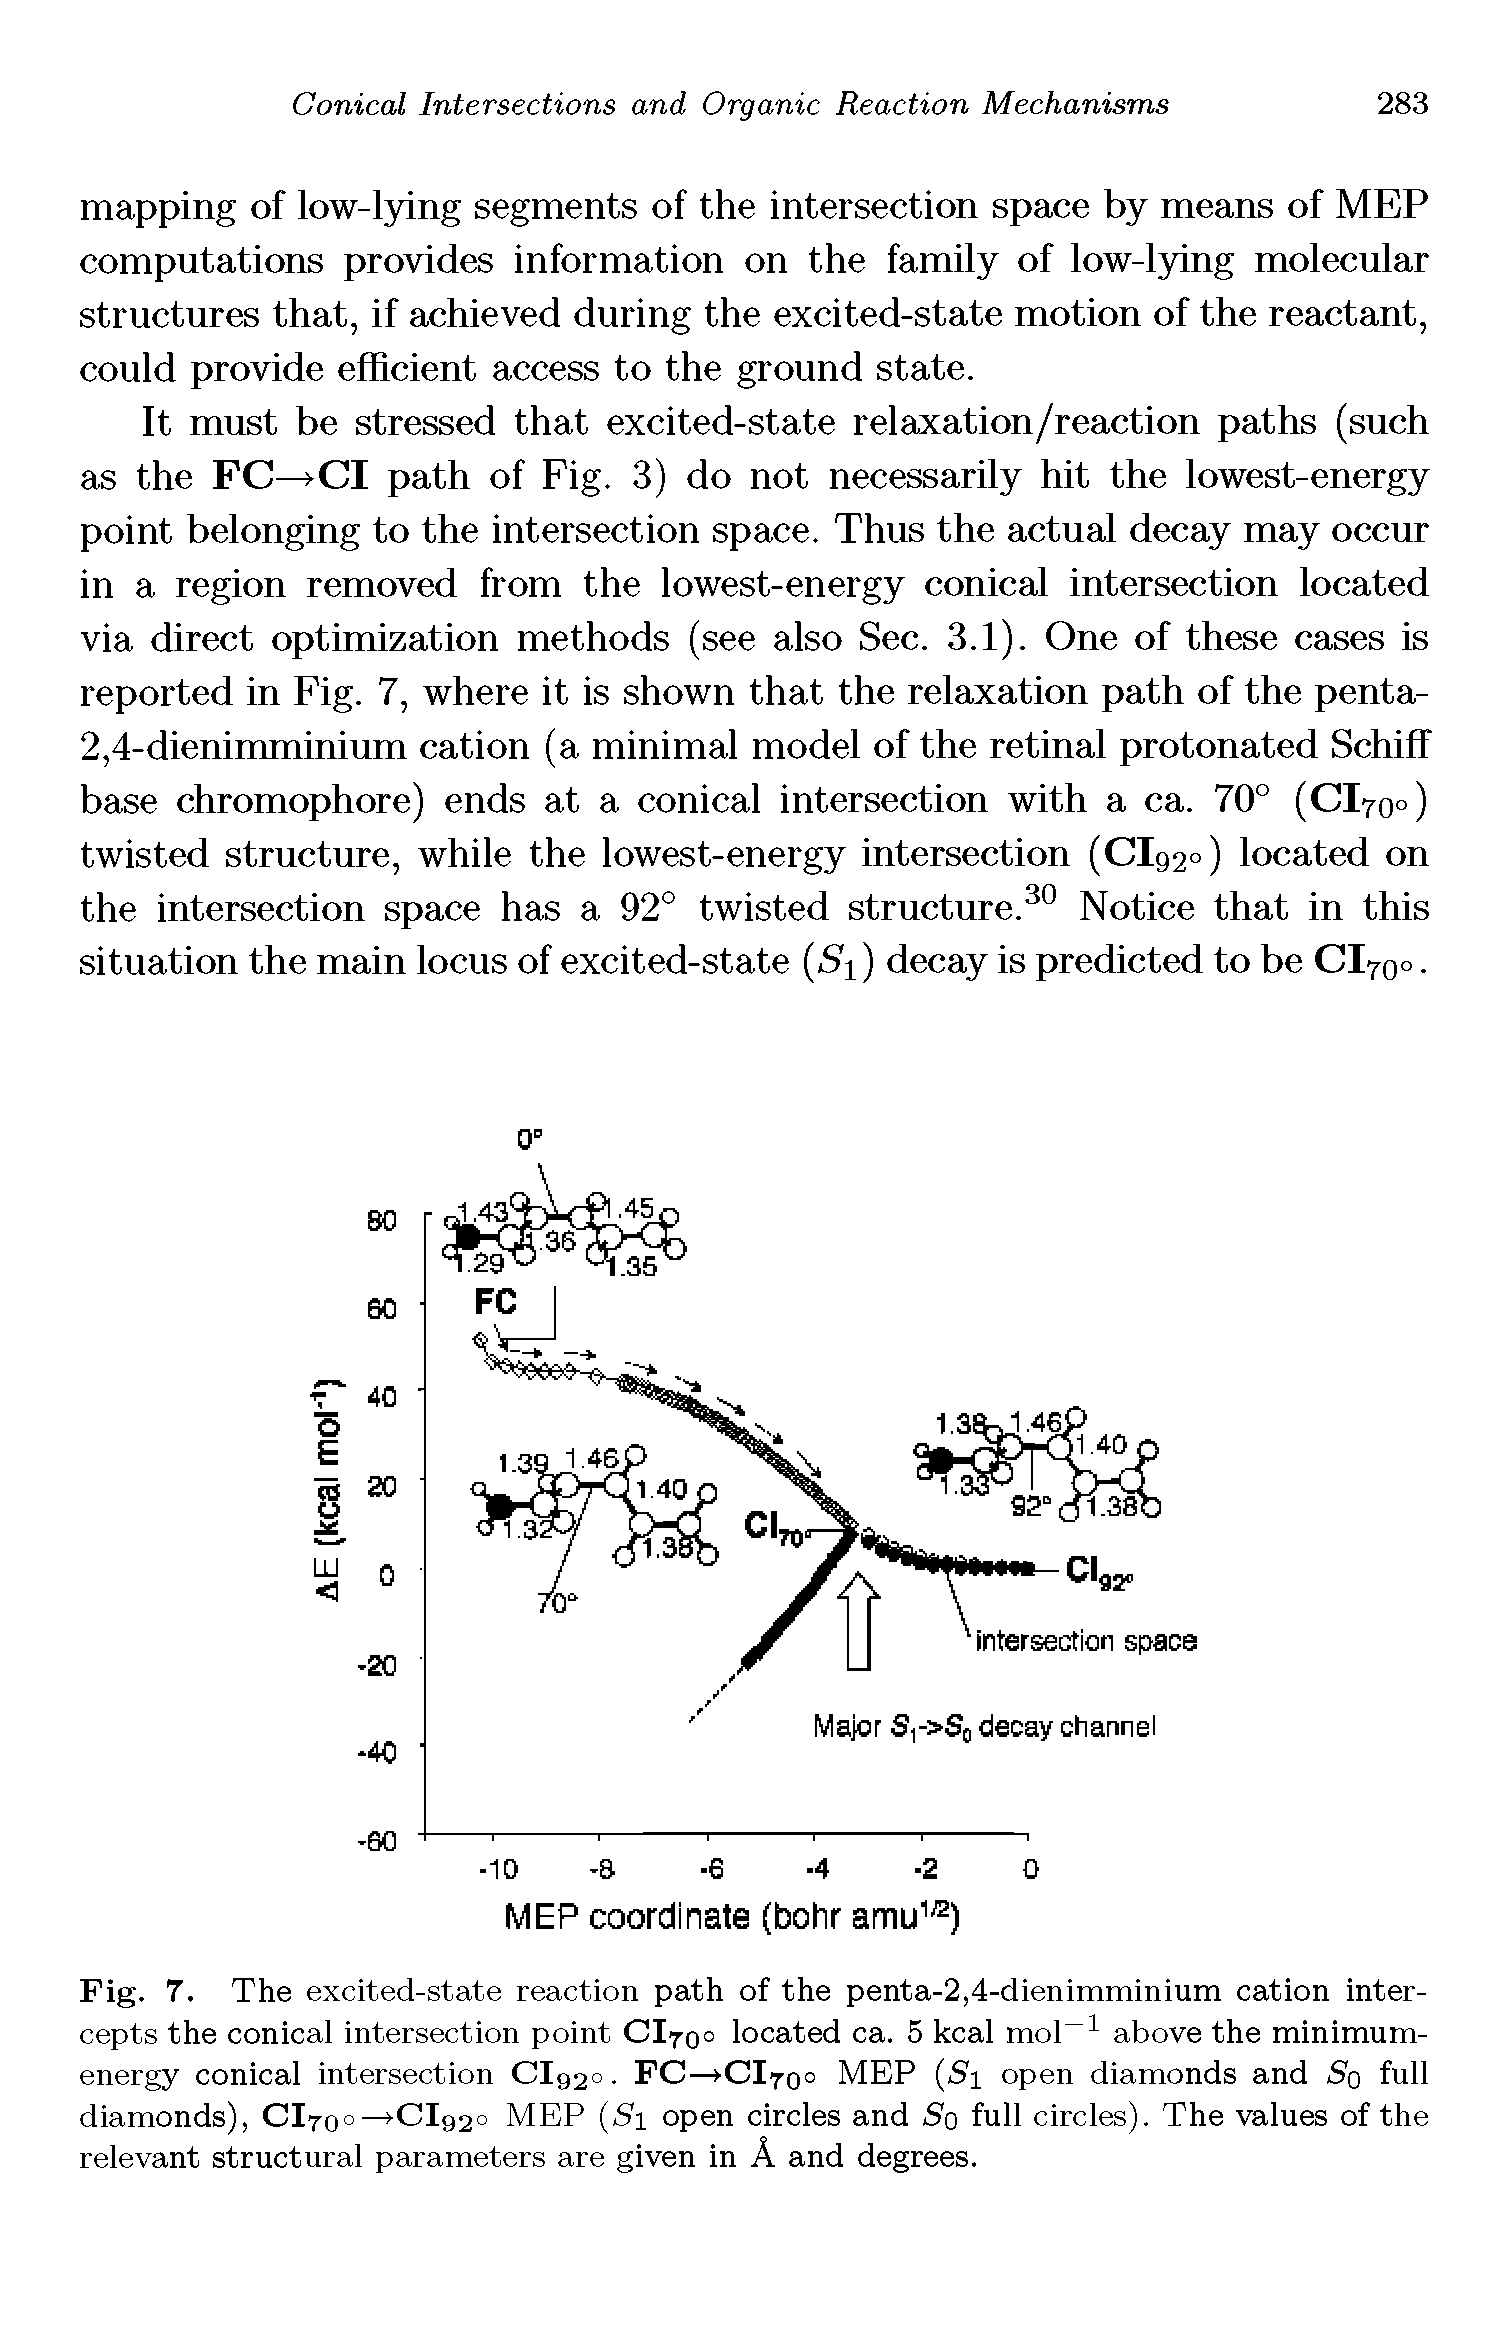 Fig. 7. The excited-state reaction path of the penta-2,4-dienimminium cation intercepts the conical intersection point CI700 located ca. 5 kcal mol above the minimum-energy conical intersection CIq2o. FC— Cl7oo MEP ( i open diamonds and So full diamonds), Cl7oo Cl92o MEP (5i open circles and So full circles). The values of the relevant structural parameters are given in A and degrees.